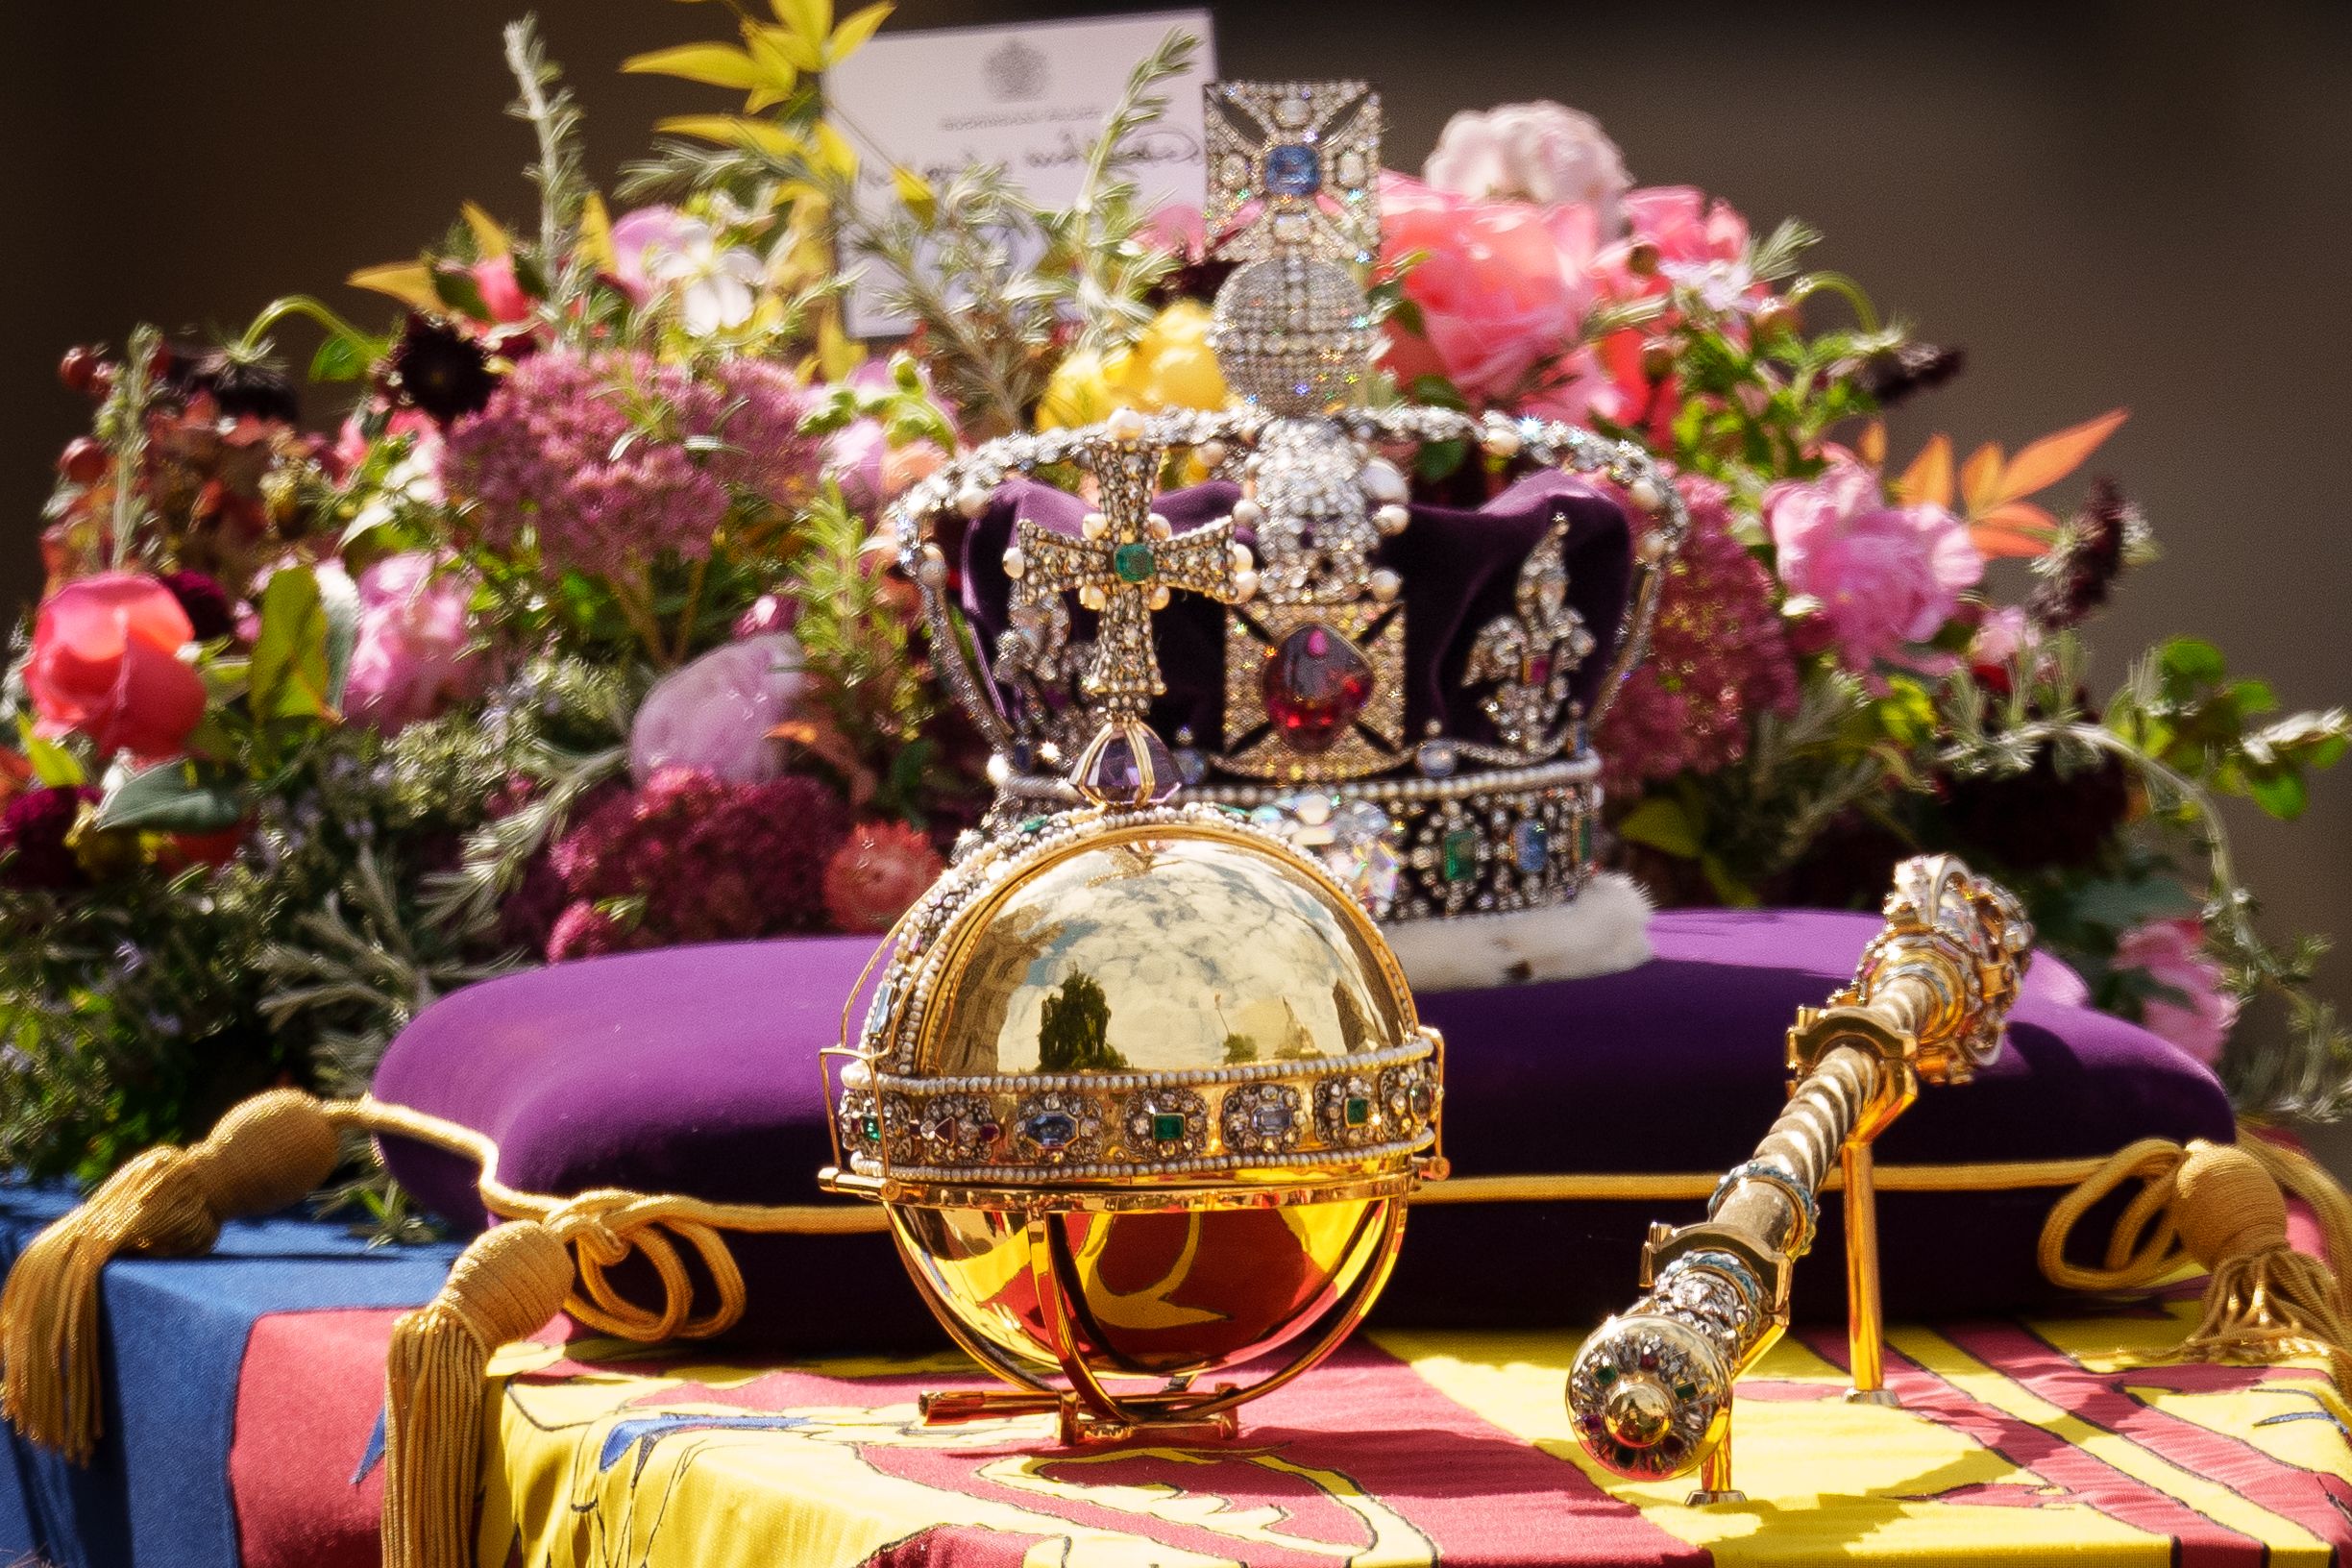 tower of london: Kohinoor display gets 'transparent' makeover at